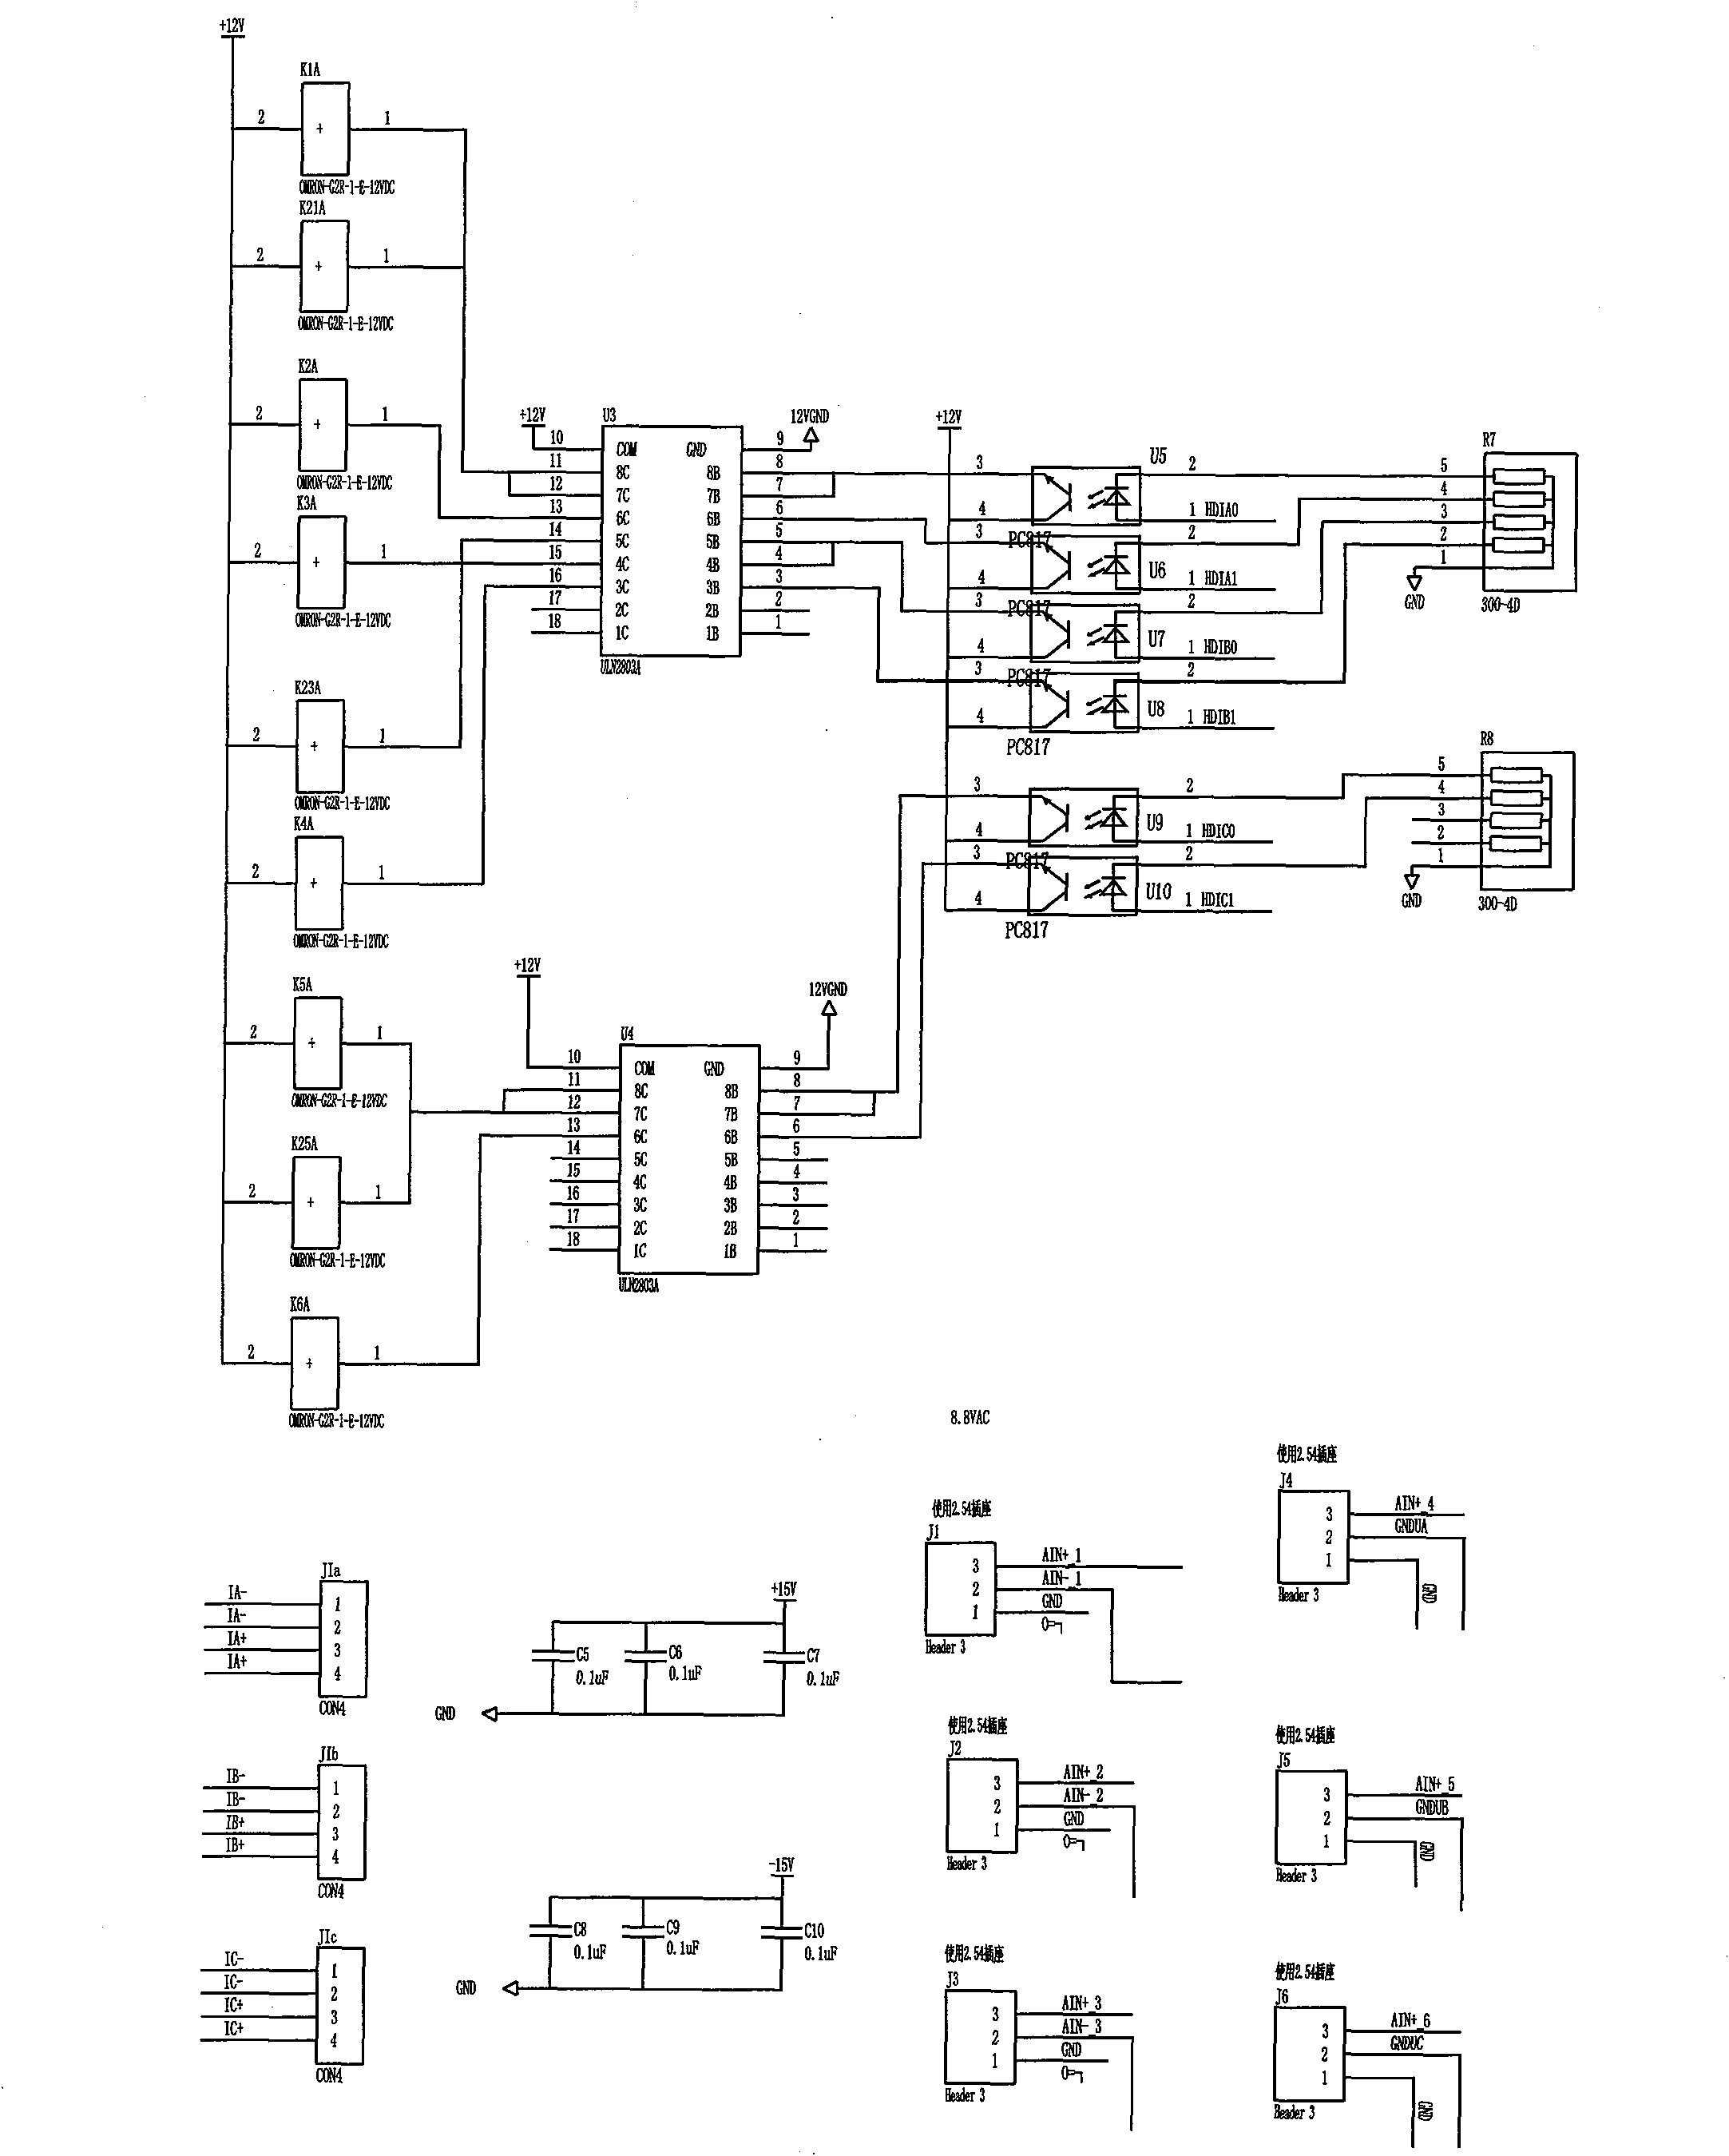 Digital electric energy meter checking device based on analog source tracing method